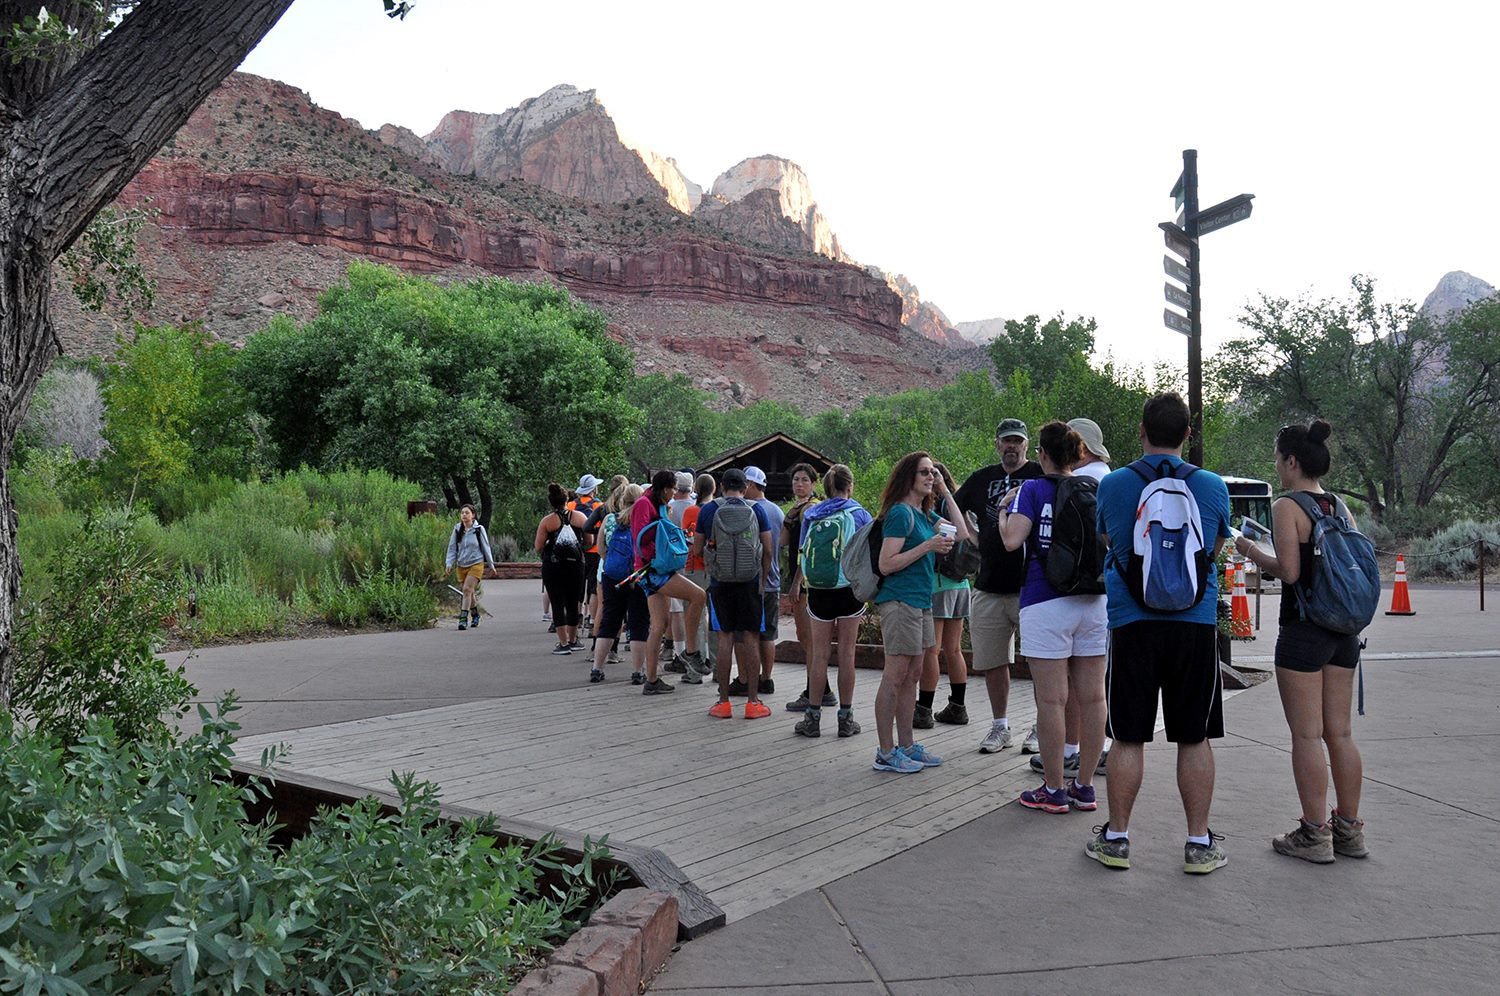 Crowds at Zion National Park